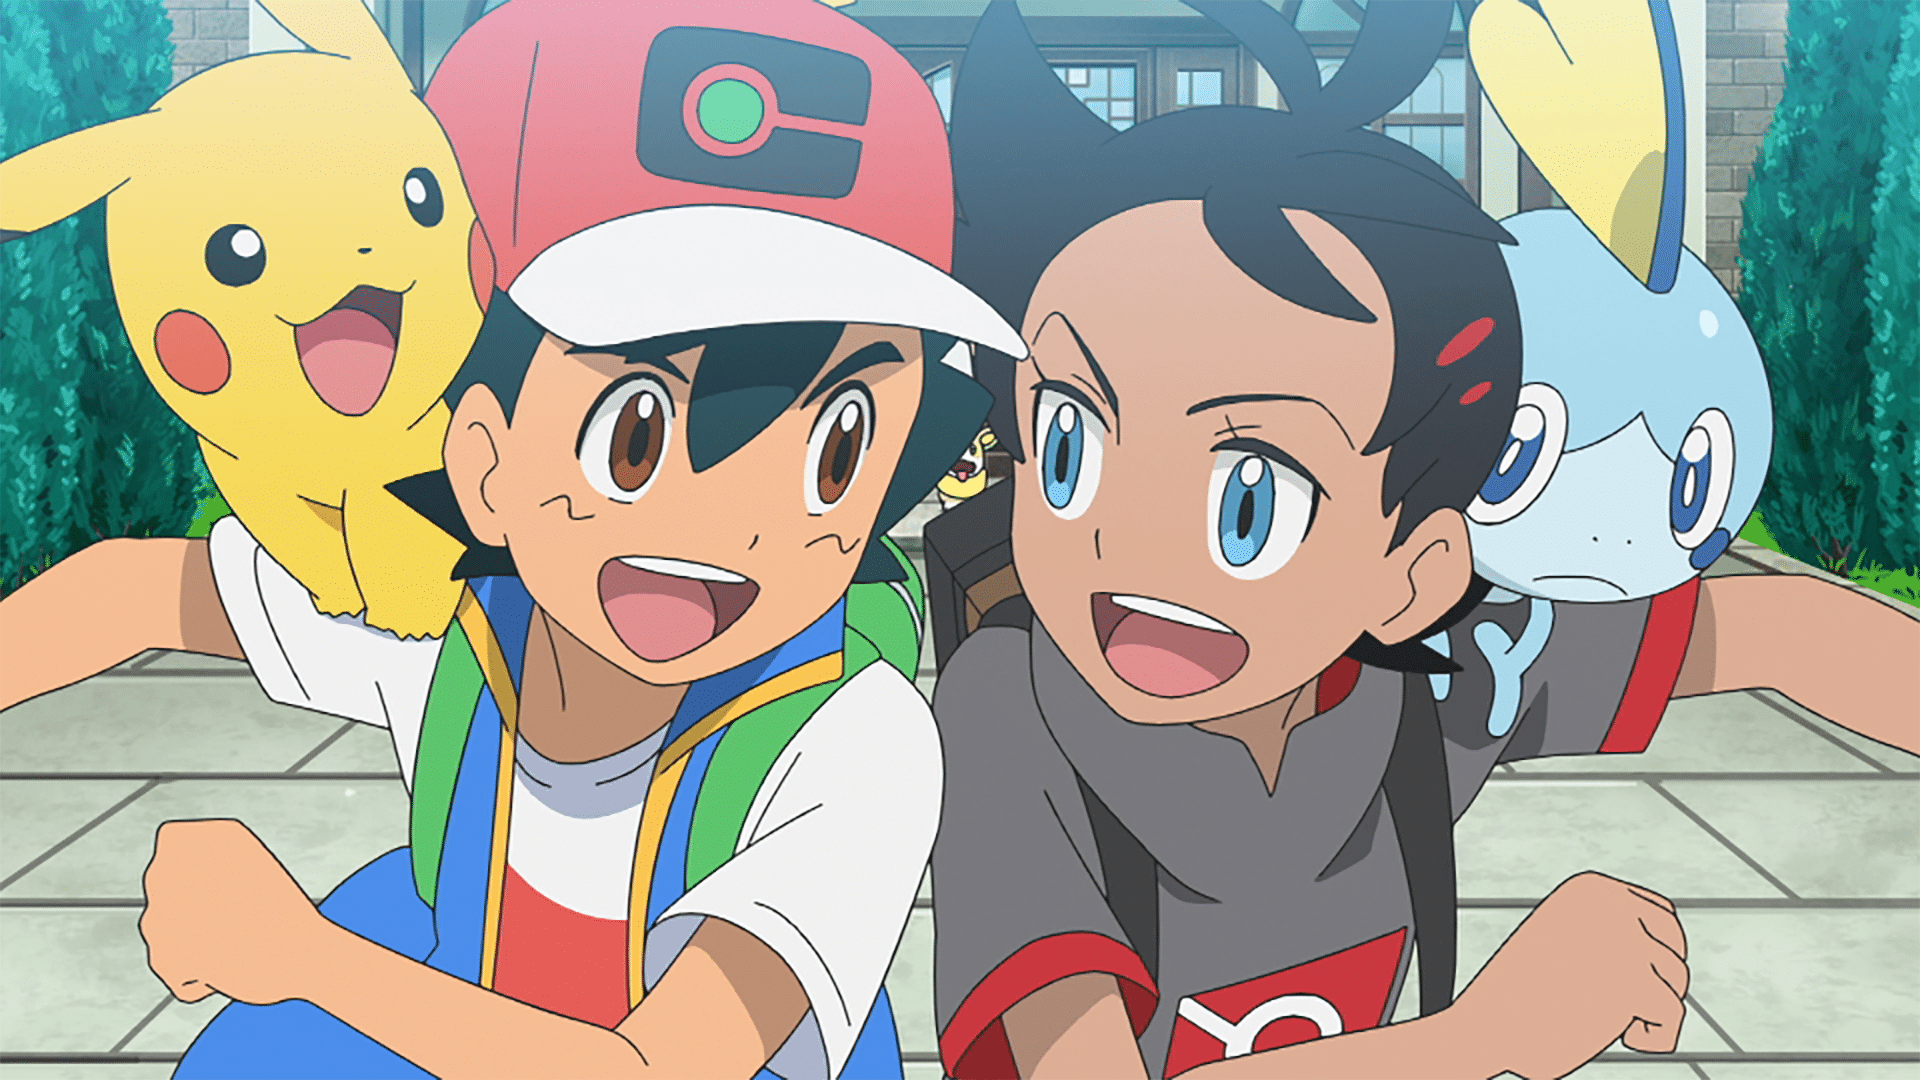 A smiling anime boy (Ash) with a yellow mouse creature on his shoulder (Pikachu) bumps shoulders with another smiling anime boy with (Goh), who has an apprehensive-looking fishlike creature on his shoulder. (Sobble).